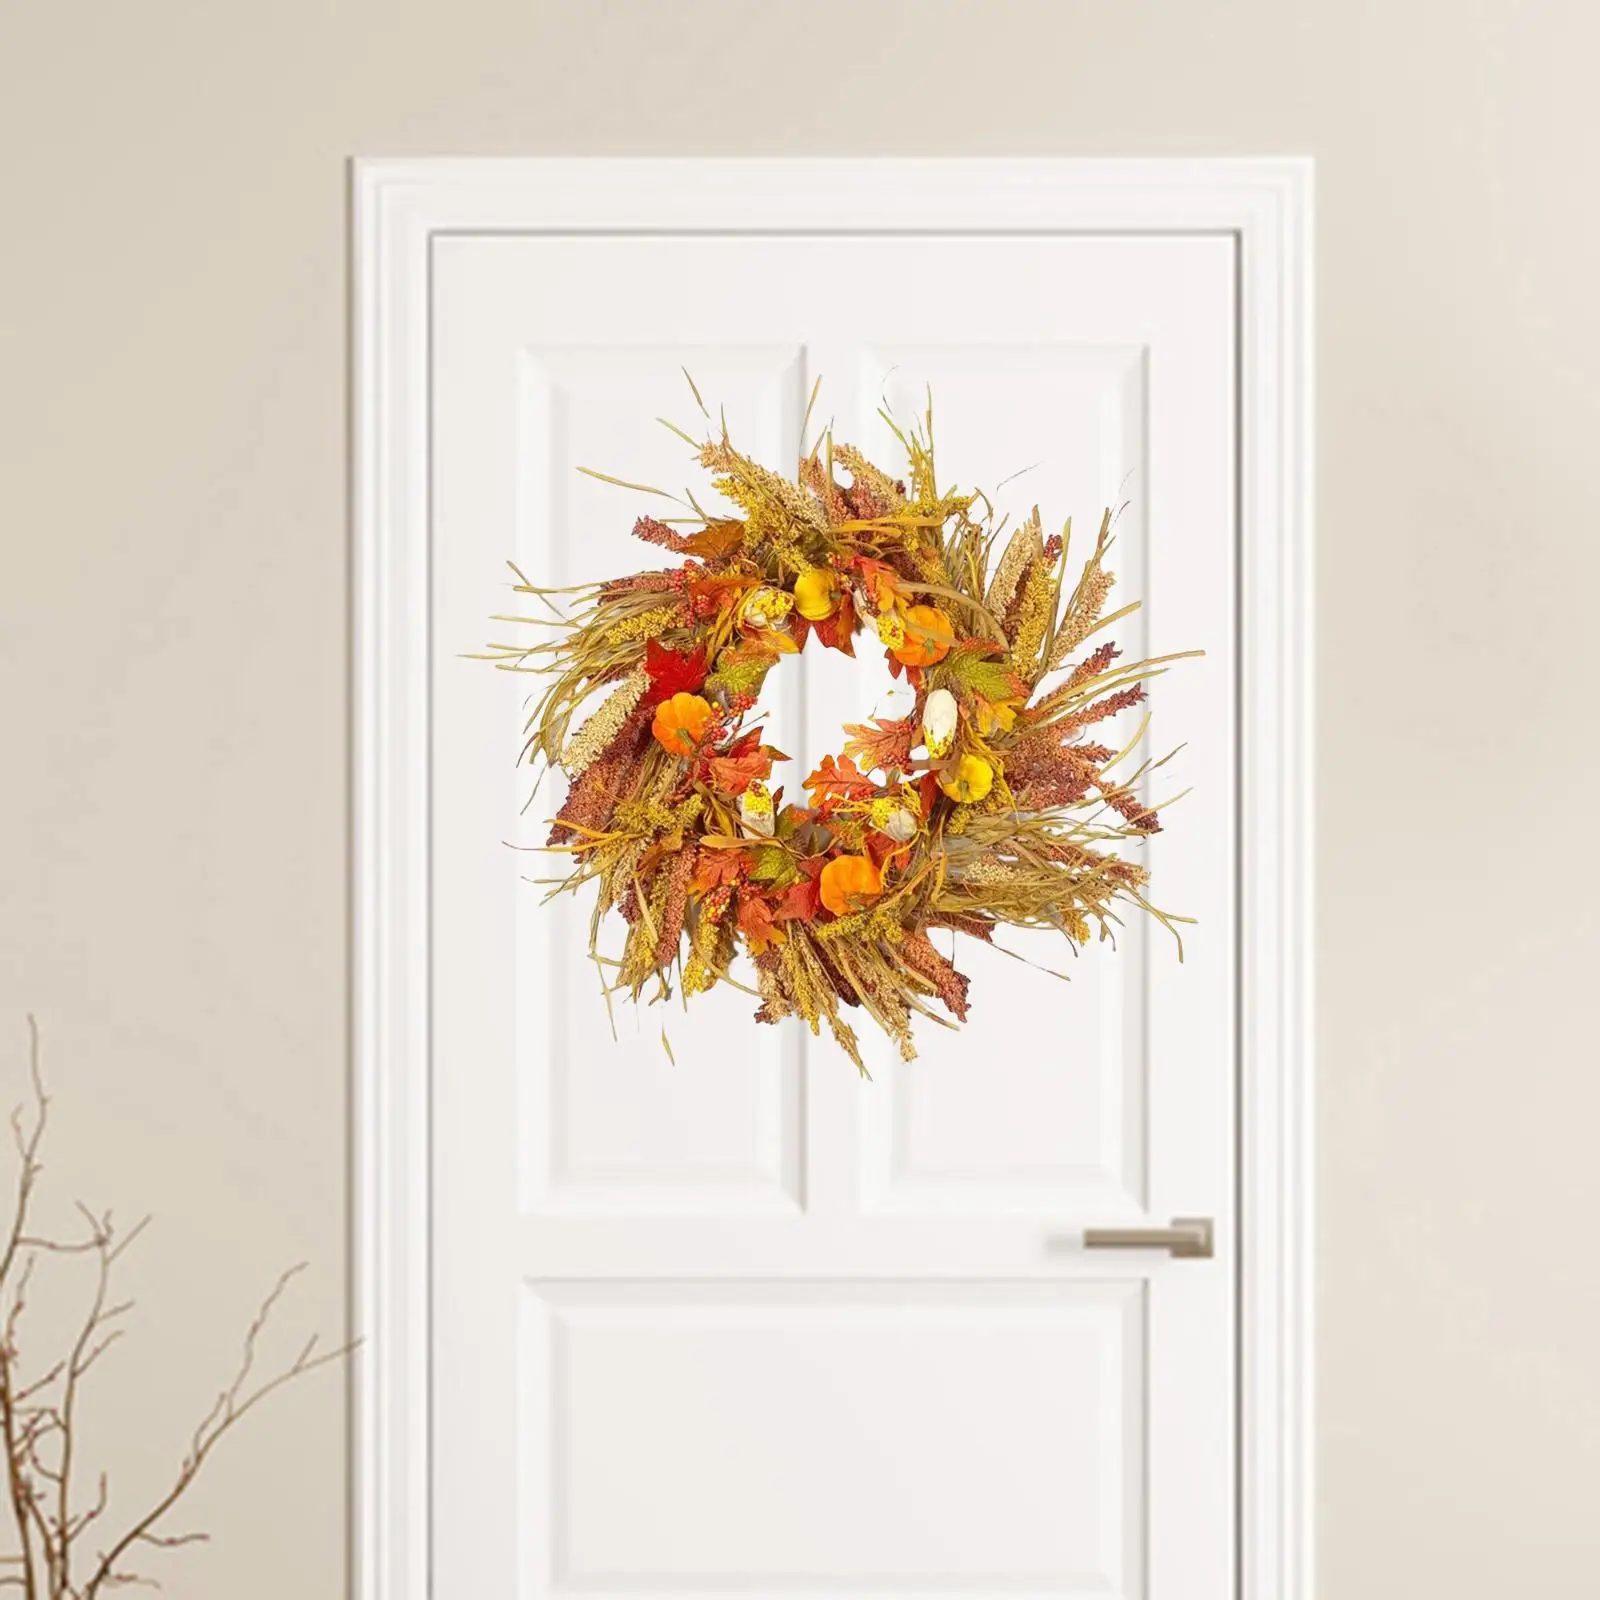 17.7inch Fall Wreath Front Door Harvest Artificial Garland Indoor Outdoor Hanger Farmhouse for Table Porch Party Wedding Home